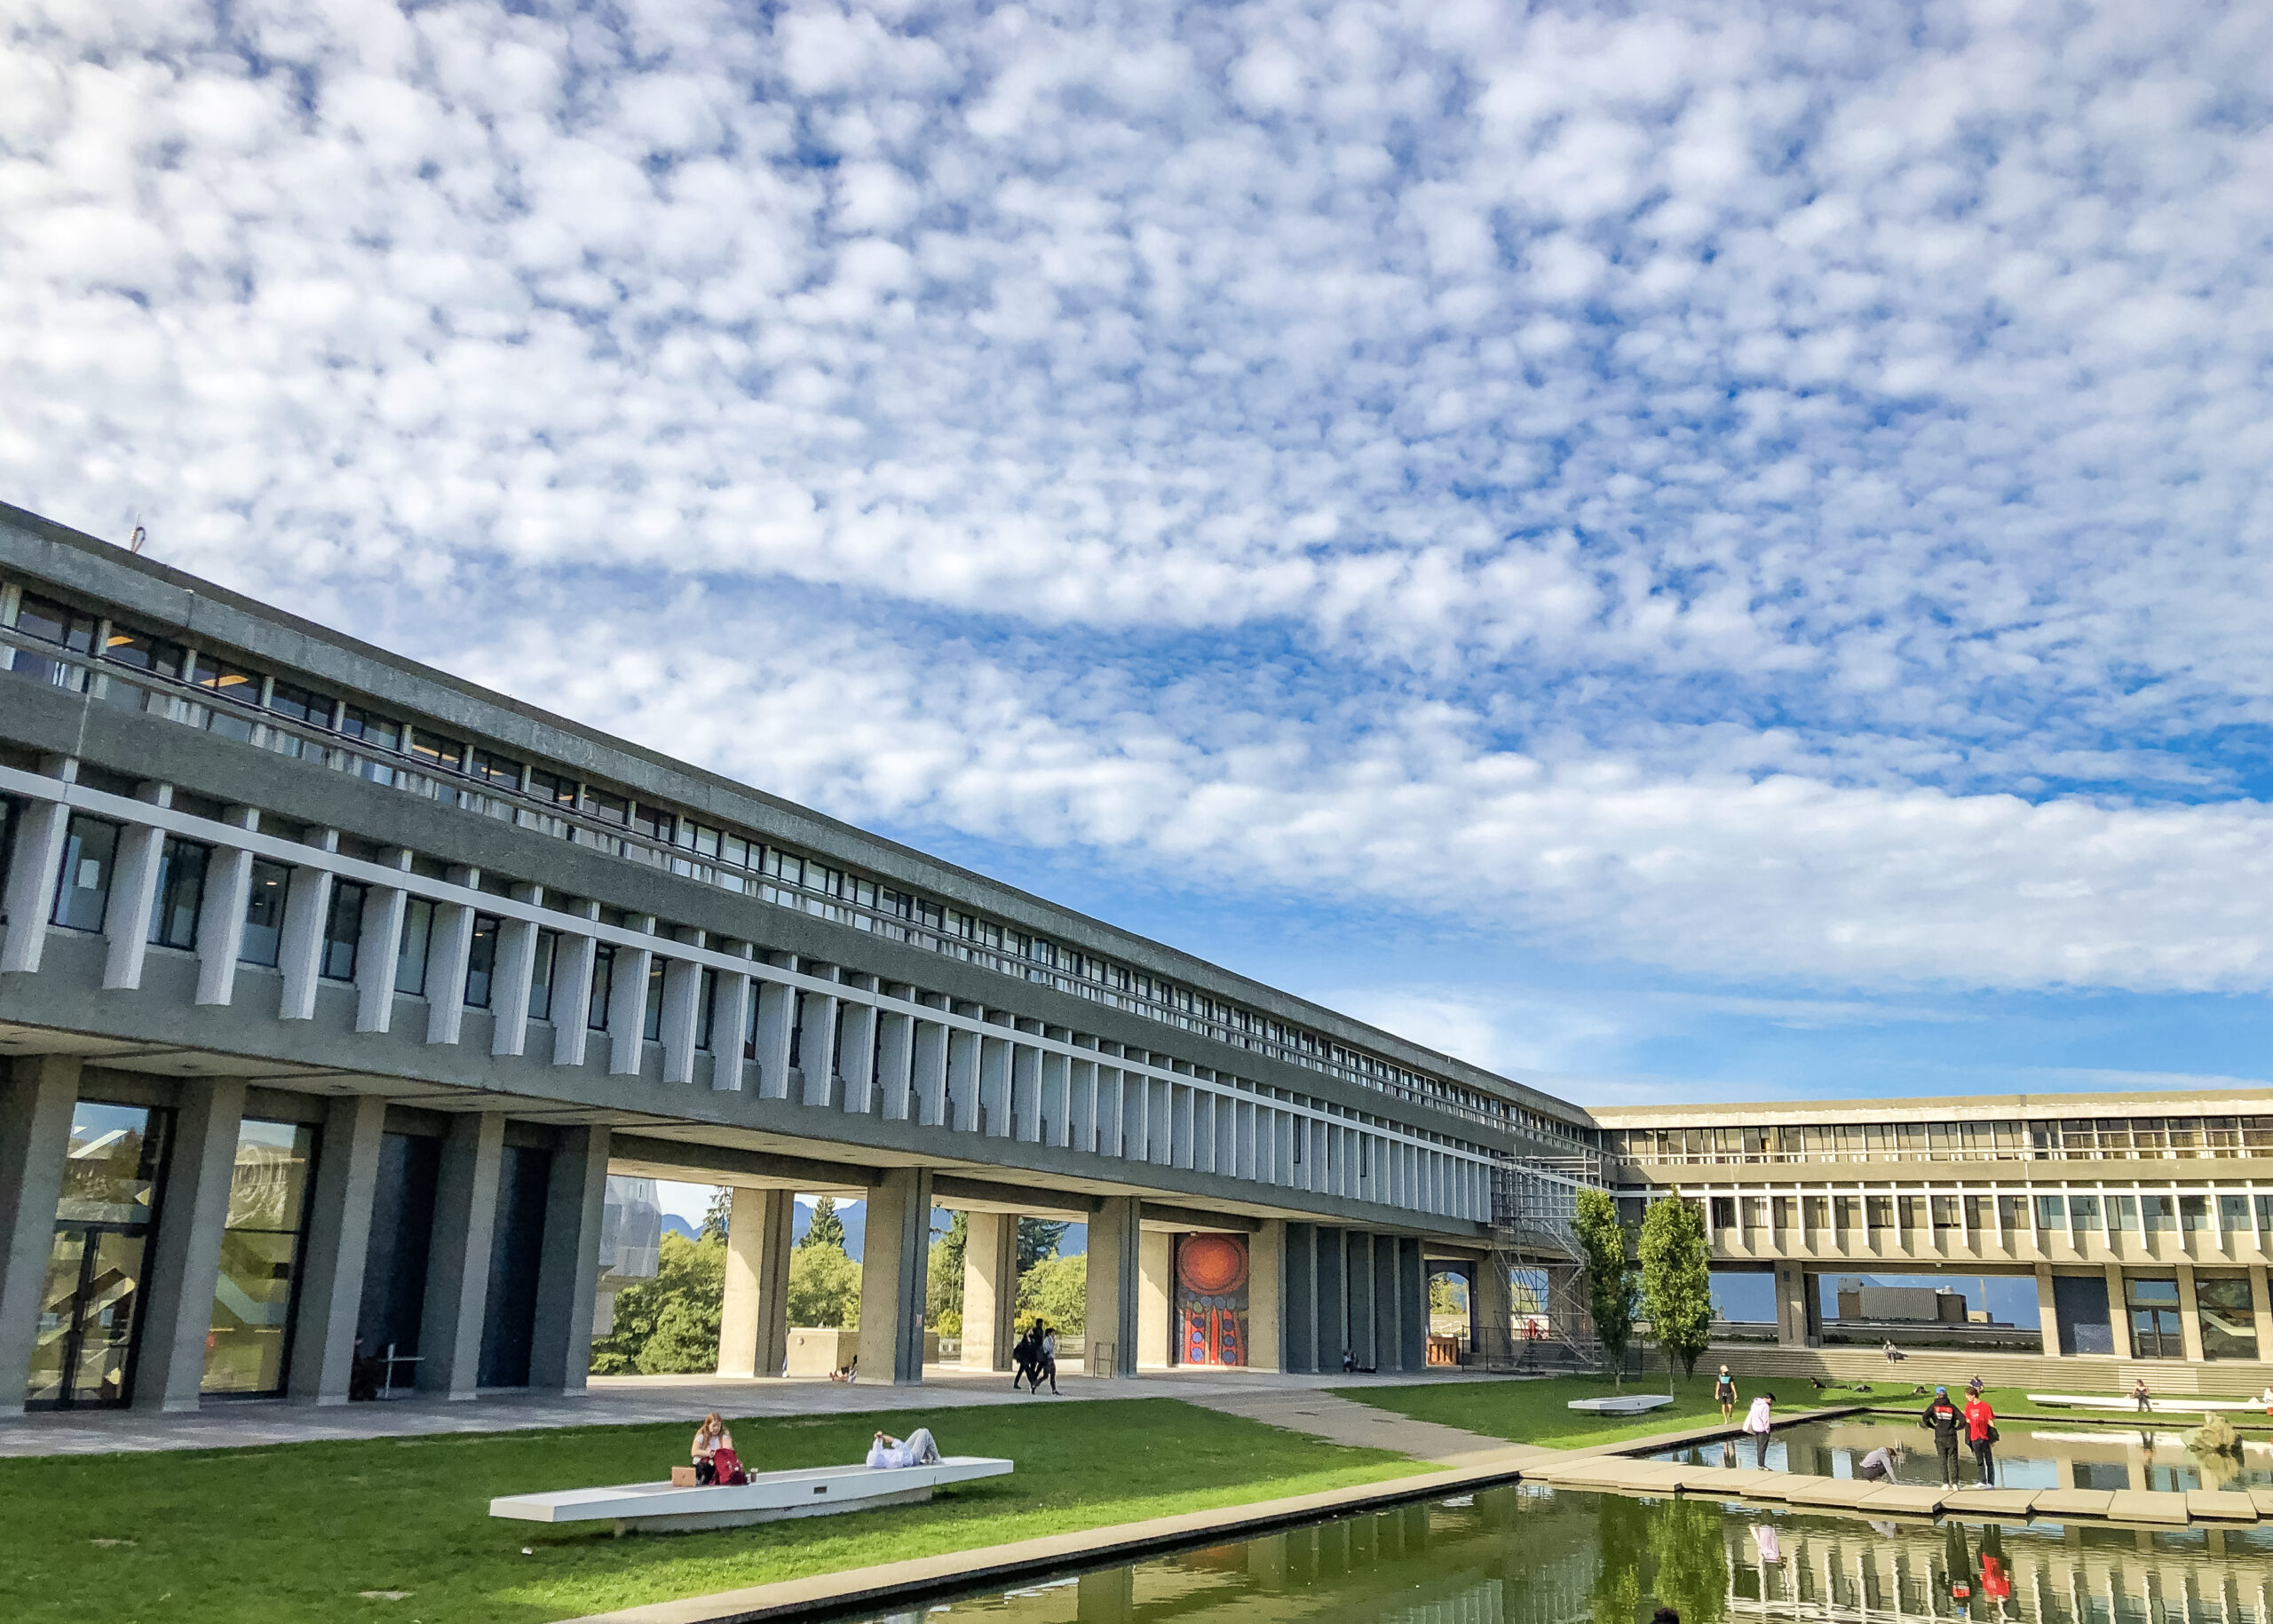 The photo is of the SFU Burnaby campus. The Academic Quadrangle and the reflection pond can be seen.